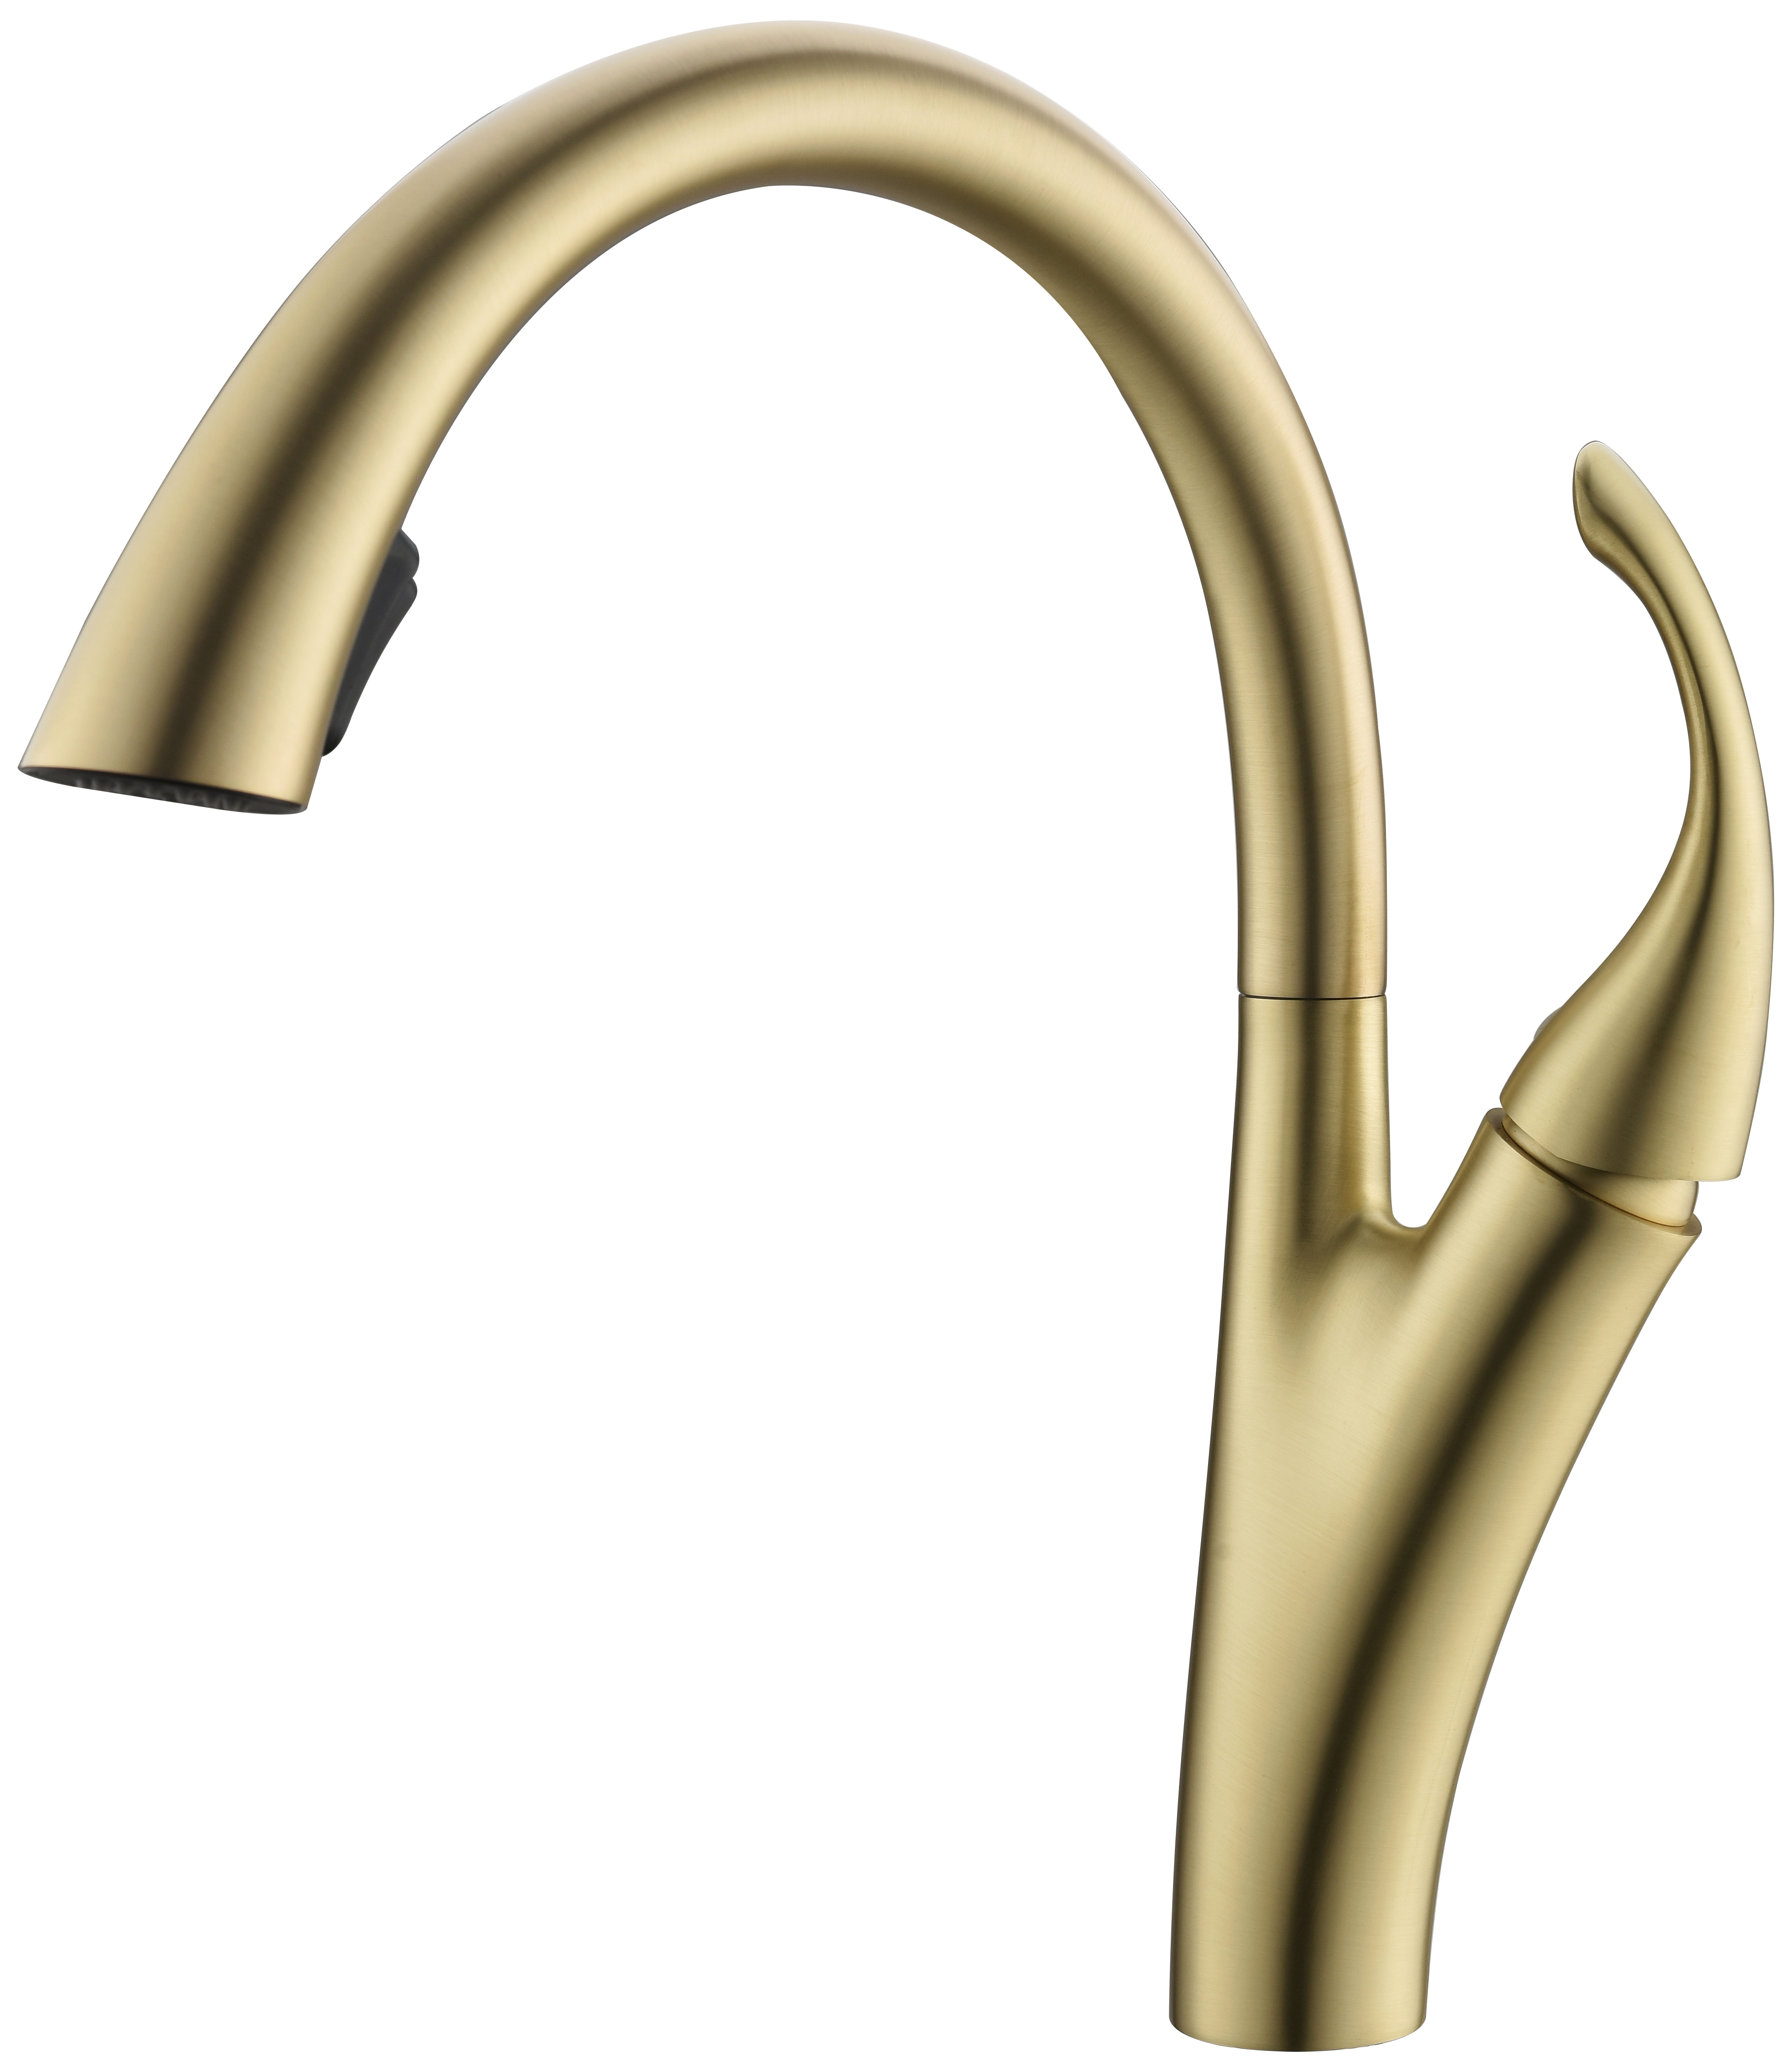 Hot Selling Gold Swivel Tap Faucet Kitchen Mixer With Cupc Certificate